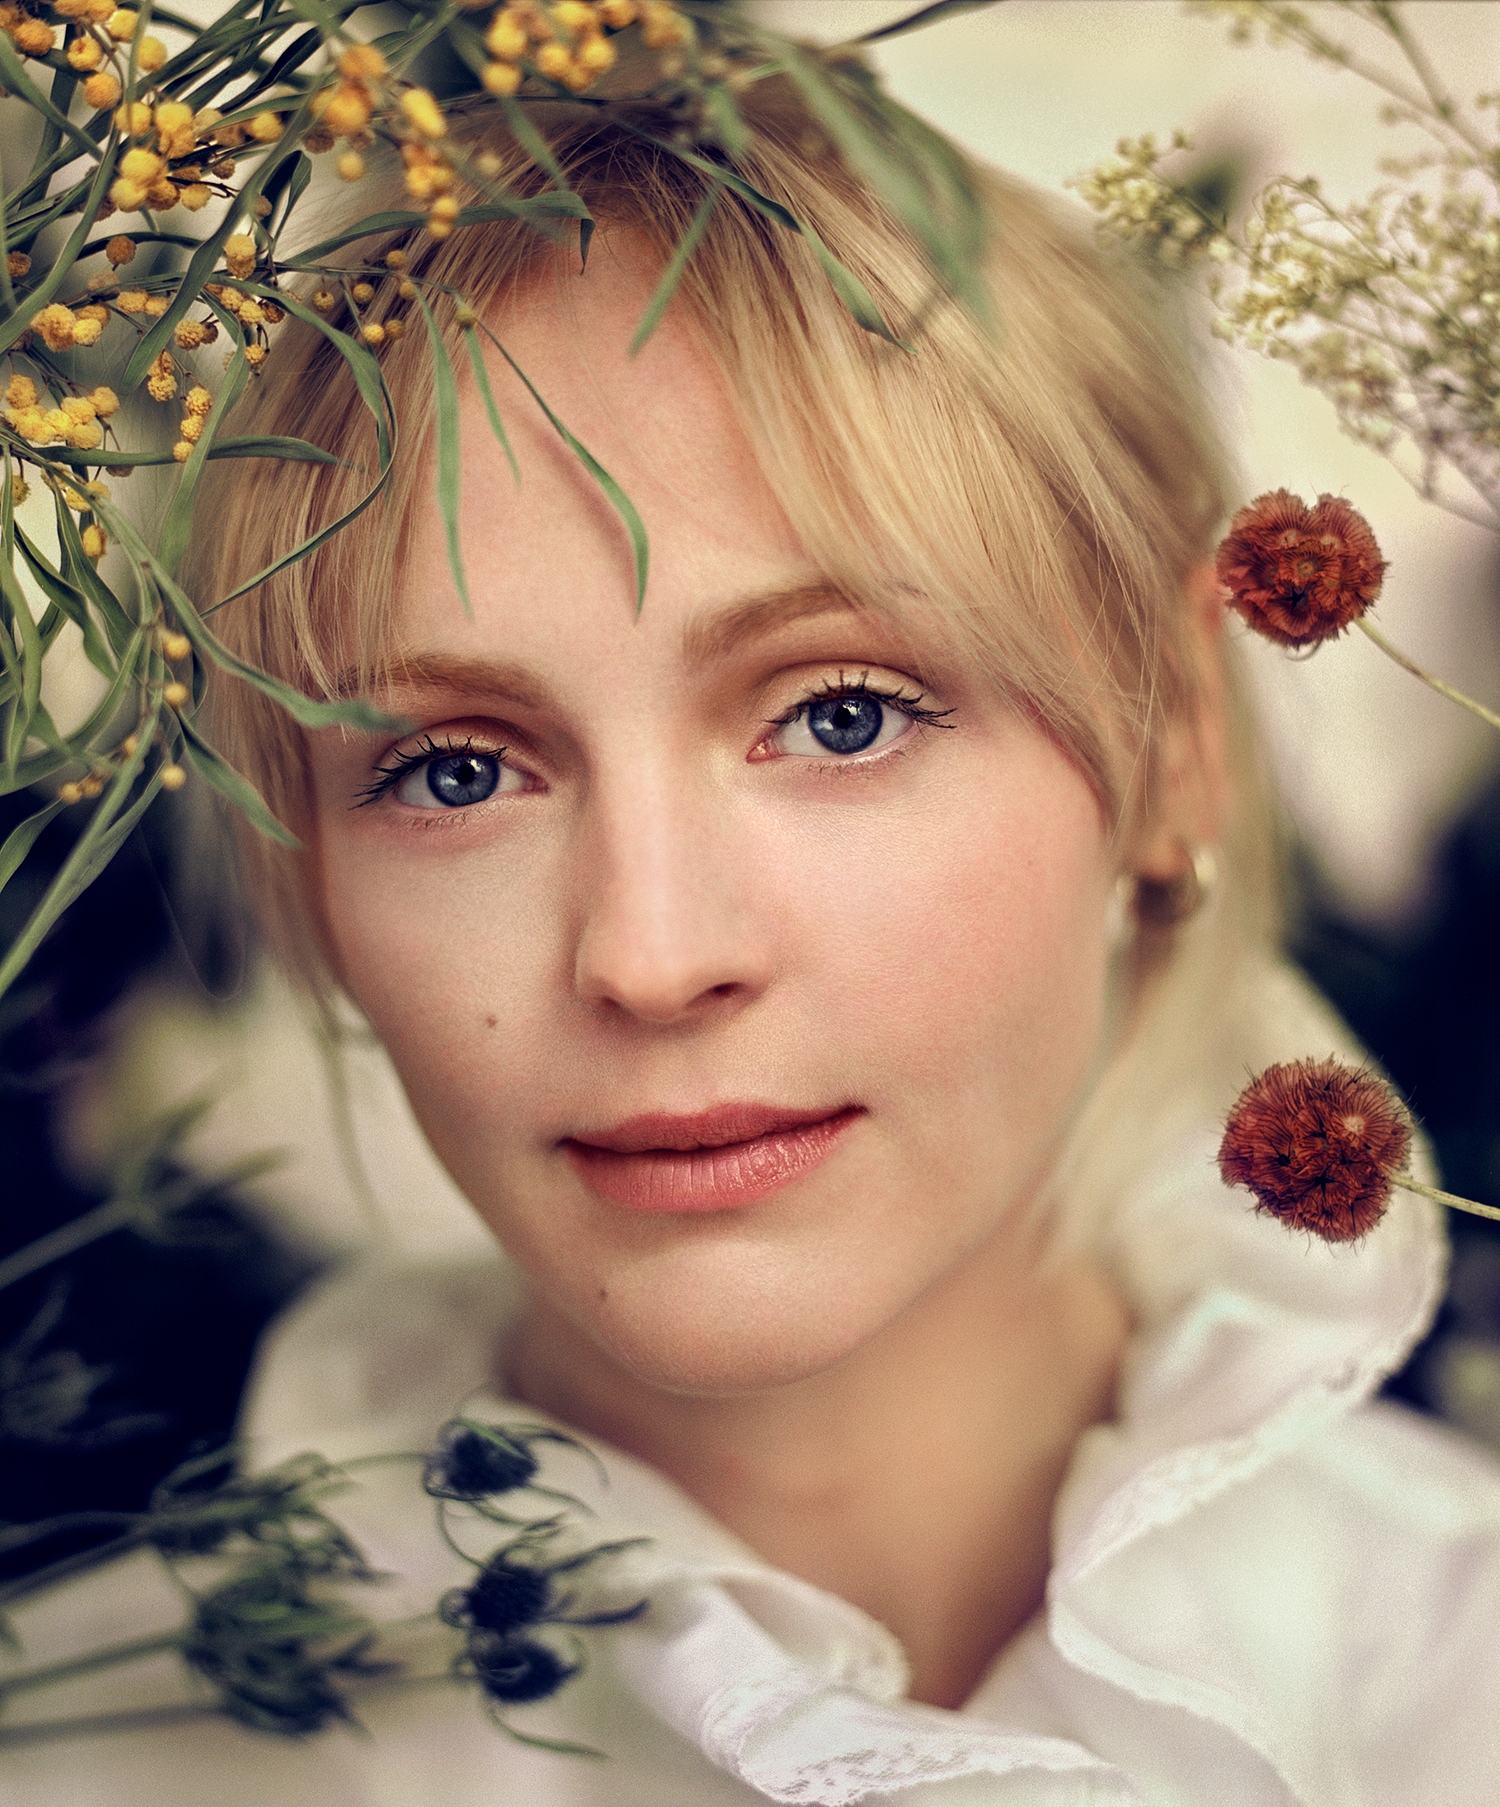 This woman's work: Laura Marling